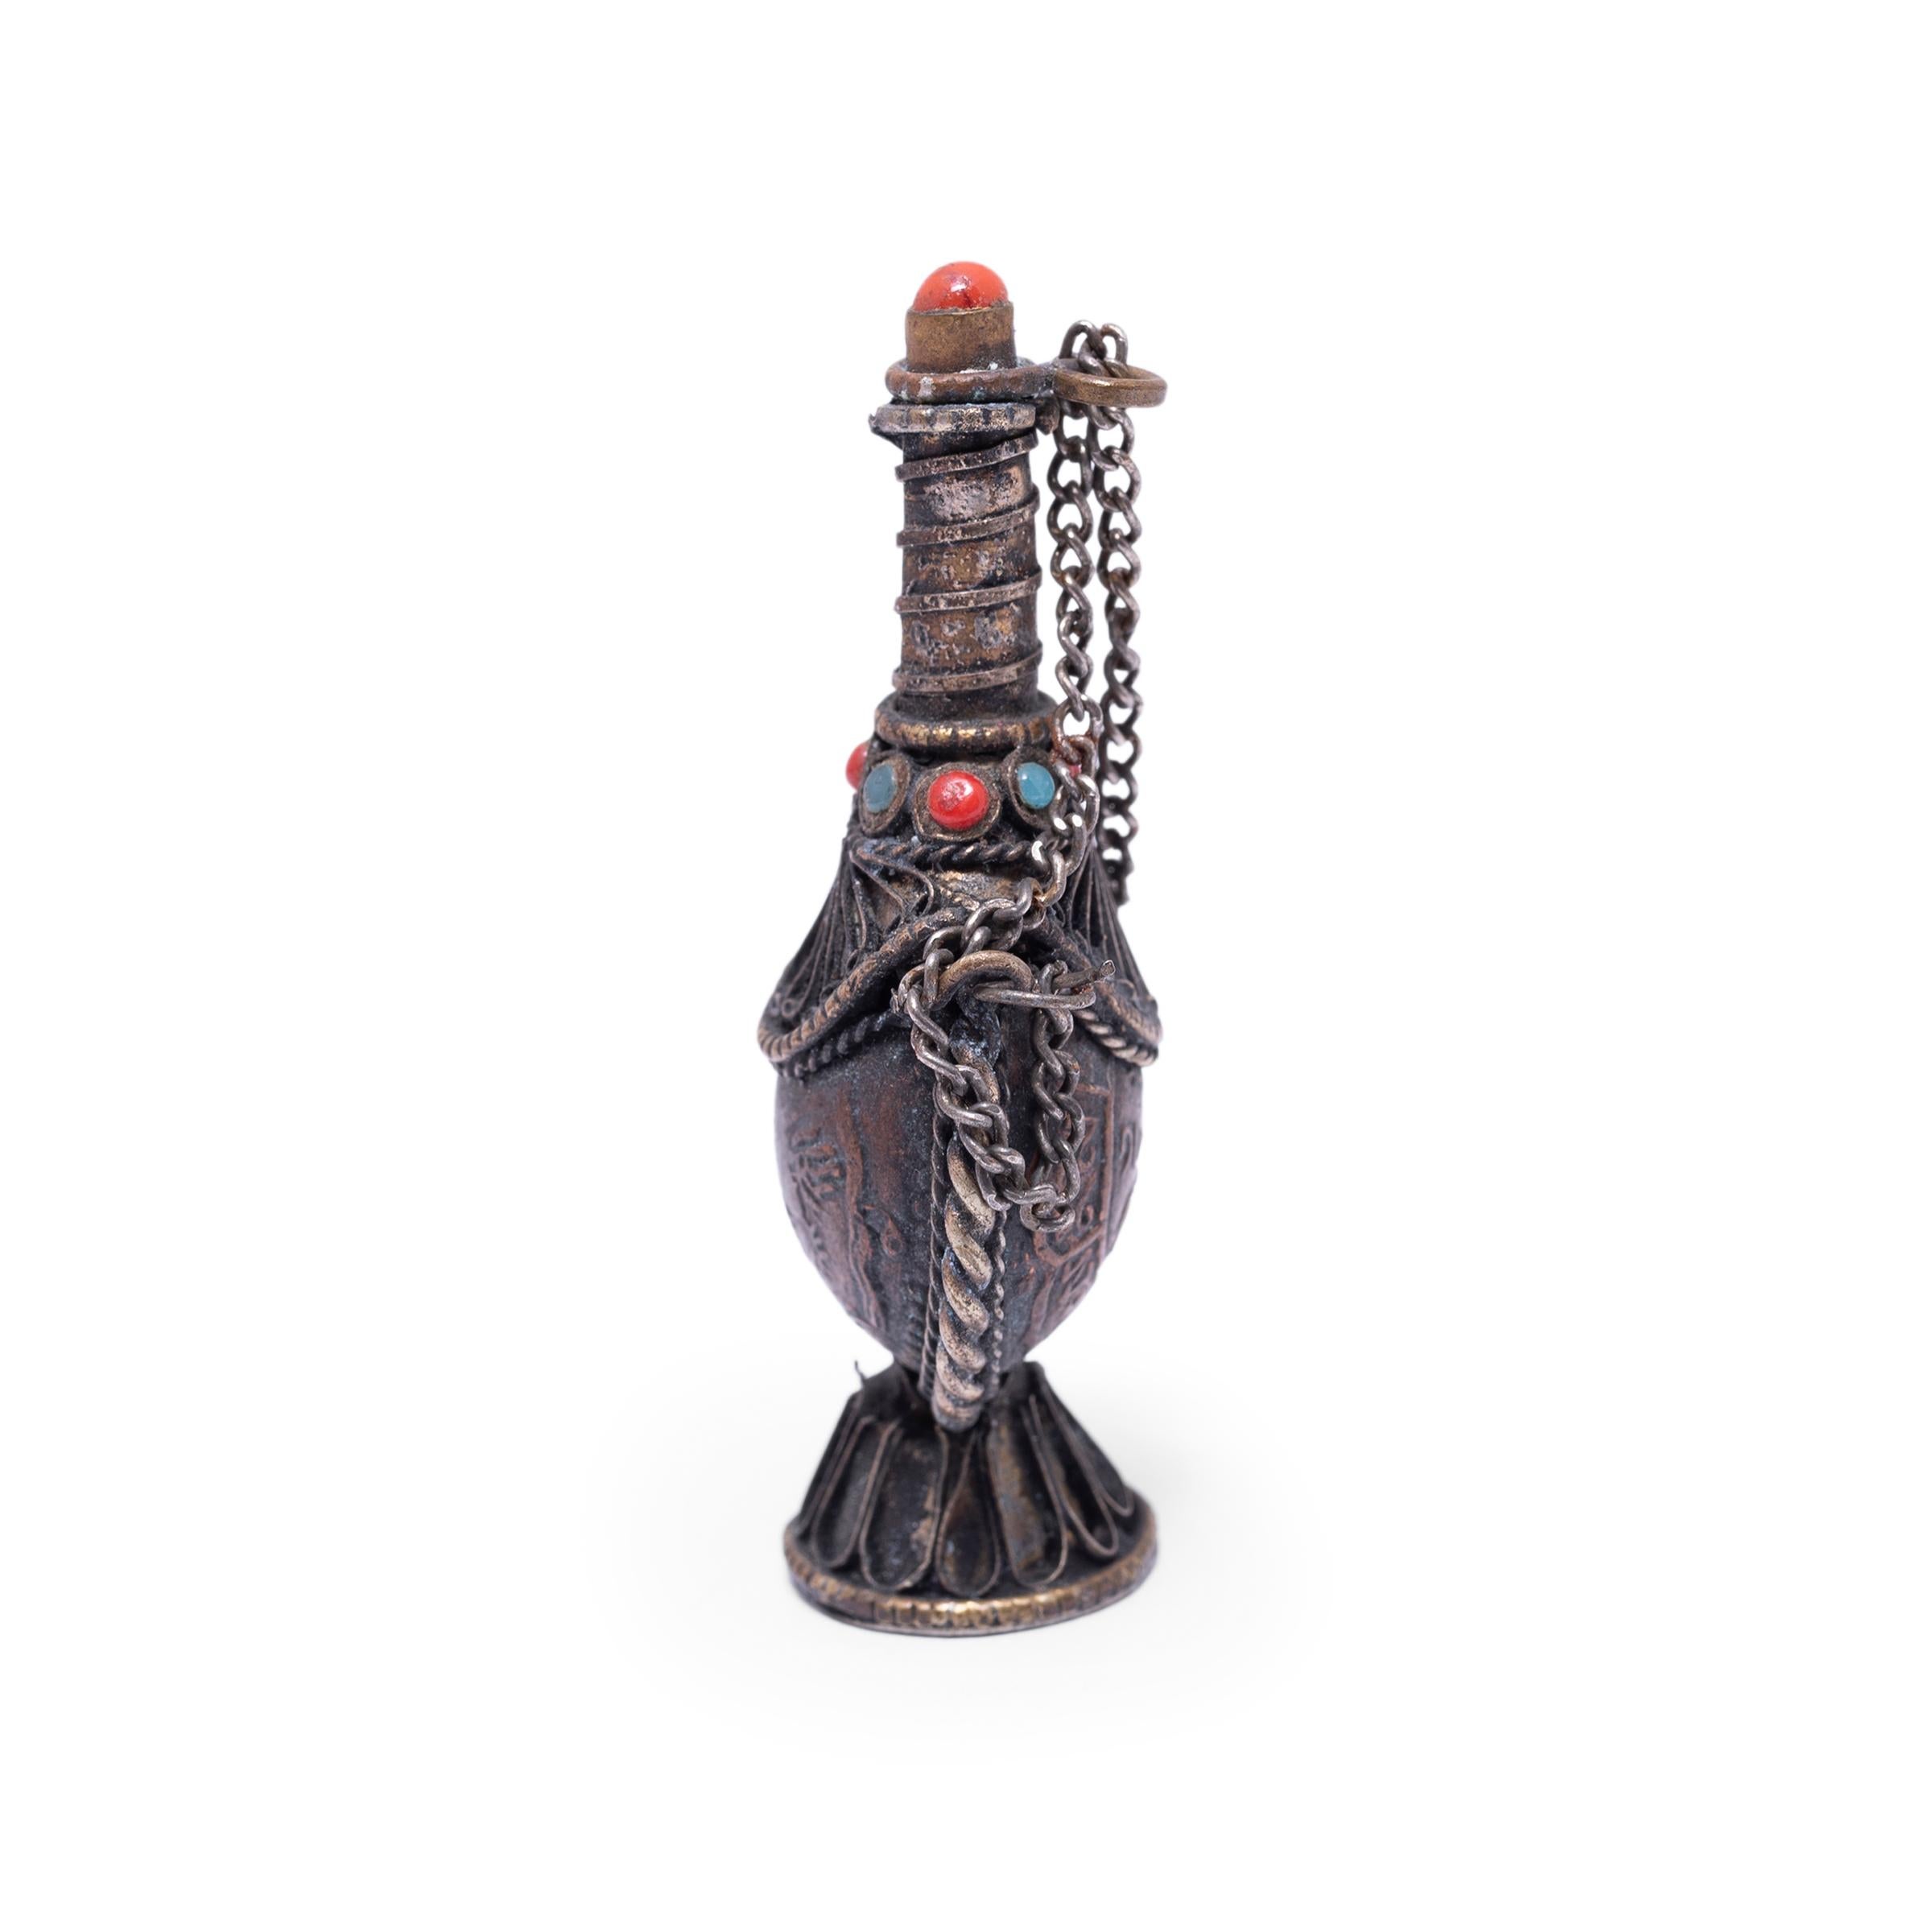 This early 20th century Tibetan snuff bottle is delightfully ornate, crafted with silver metalwork and encrusted with colorful beads. The small bottle has a teardrop shape with a footed base and a long, slender neck. The lid is adorned with a red